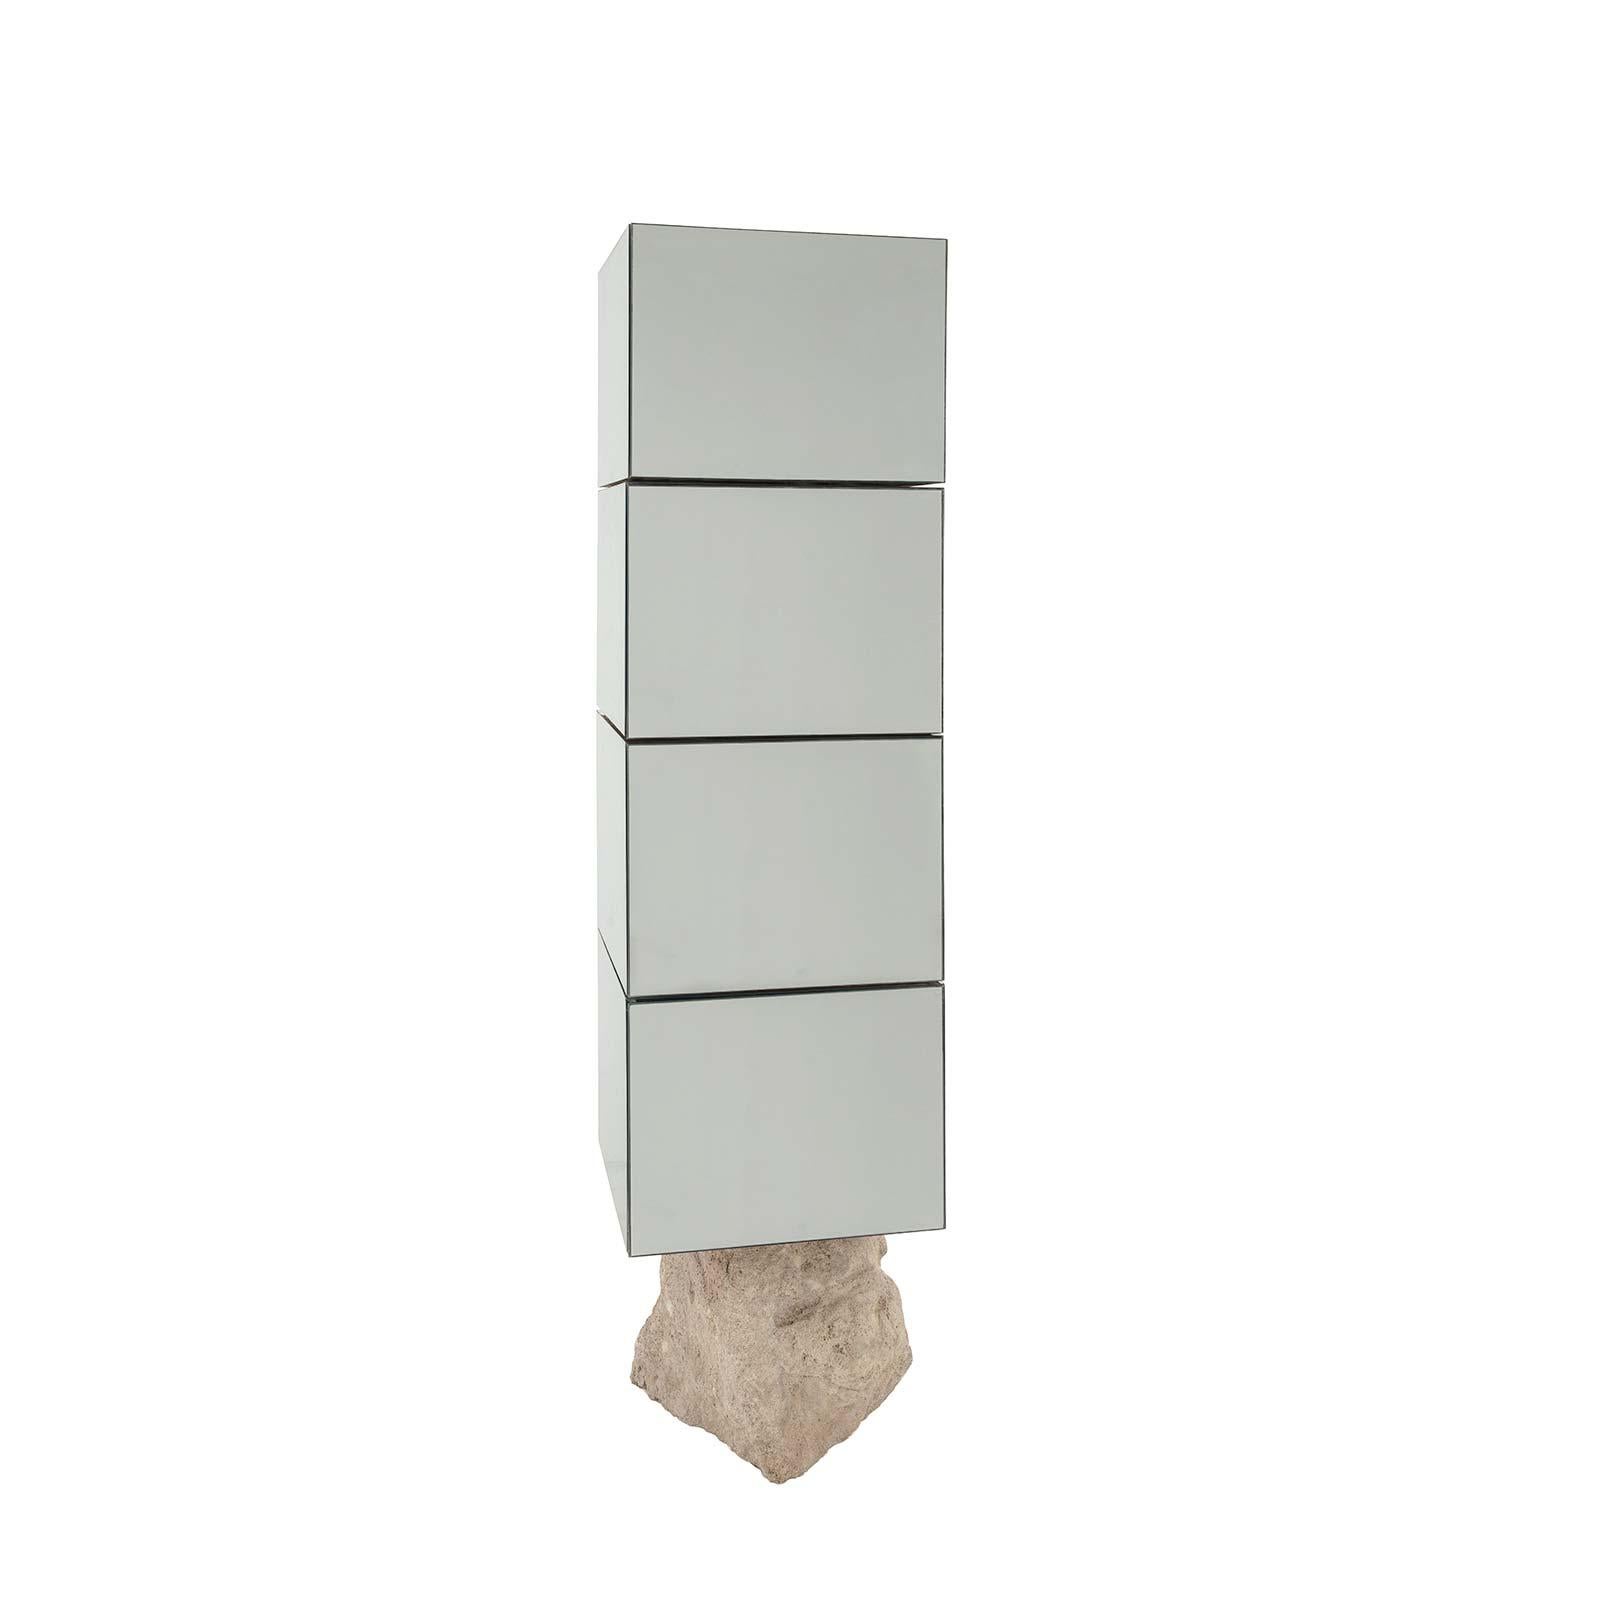 Designed by Francesco Maria Messina

Turnable bookshelf made of silver mirrored acrylic and aluminum lining and supported by a natural coral stone. Internal part in a genuine turquoise Italian leather.

Limited edition of 9 pieces.